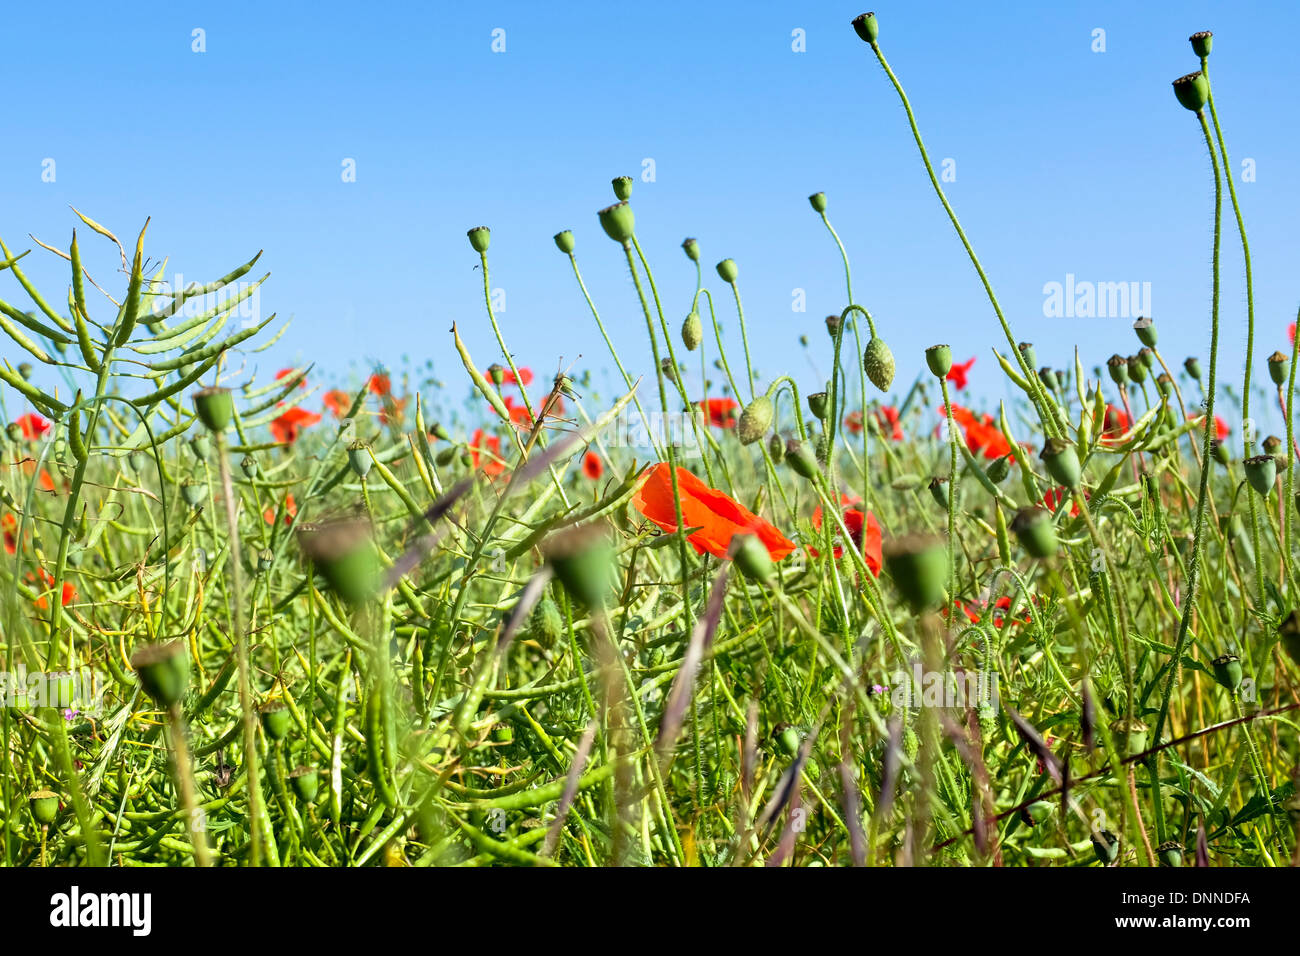 close up of poppy field showing flower heads and seed cases blowing in the wind against a blue sky Stock Photo